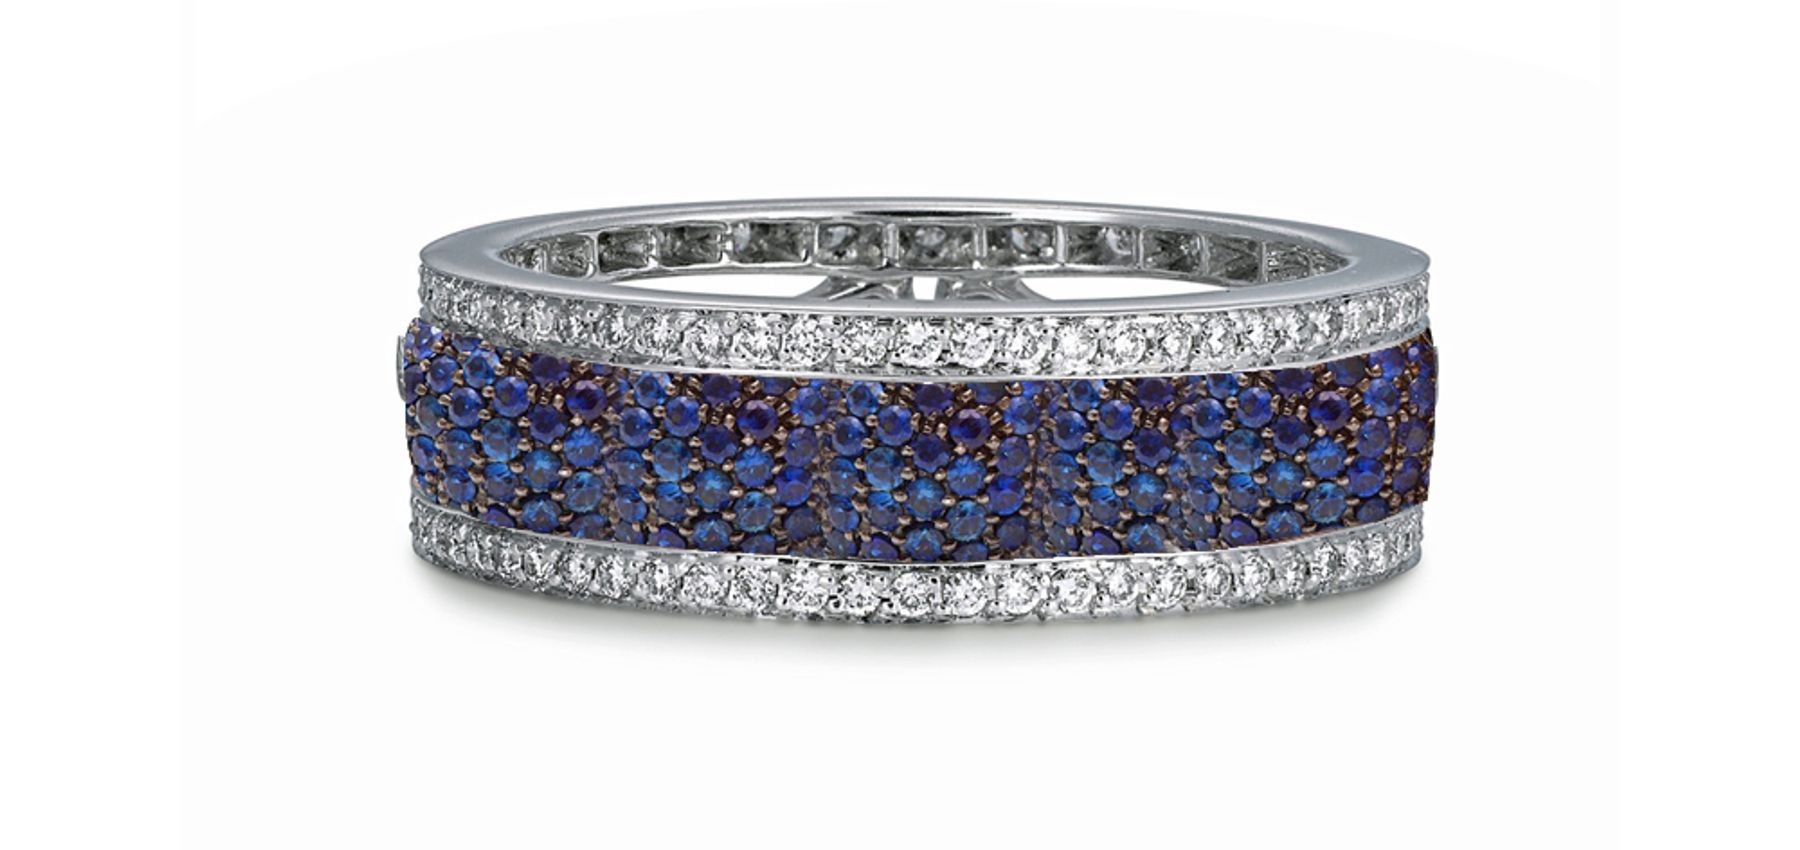 Shop Fine Quality Made To Order Round pave Set Diamond & Blue Sapphire Eternity Style Wedding & Anniversary Rings